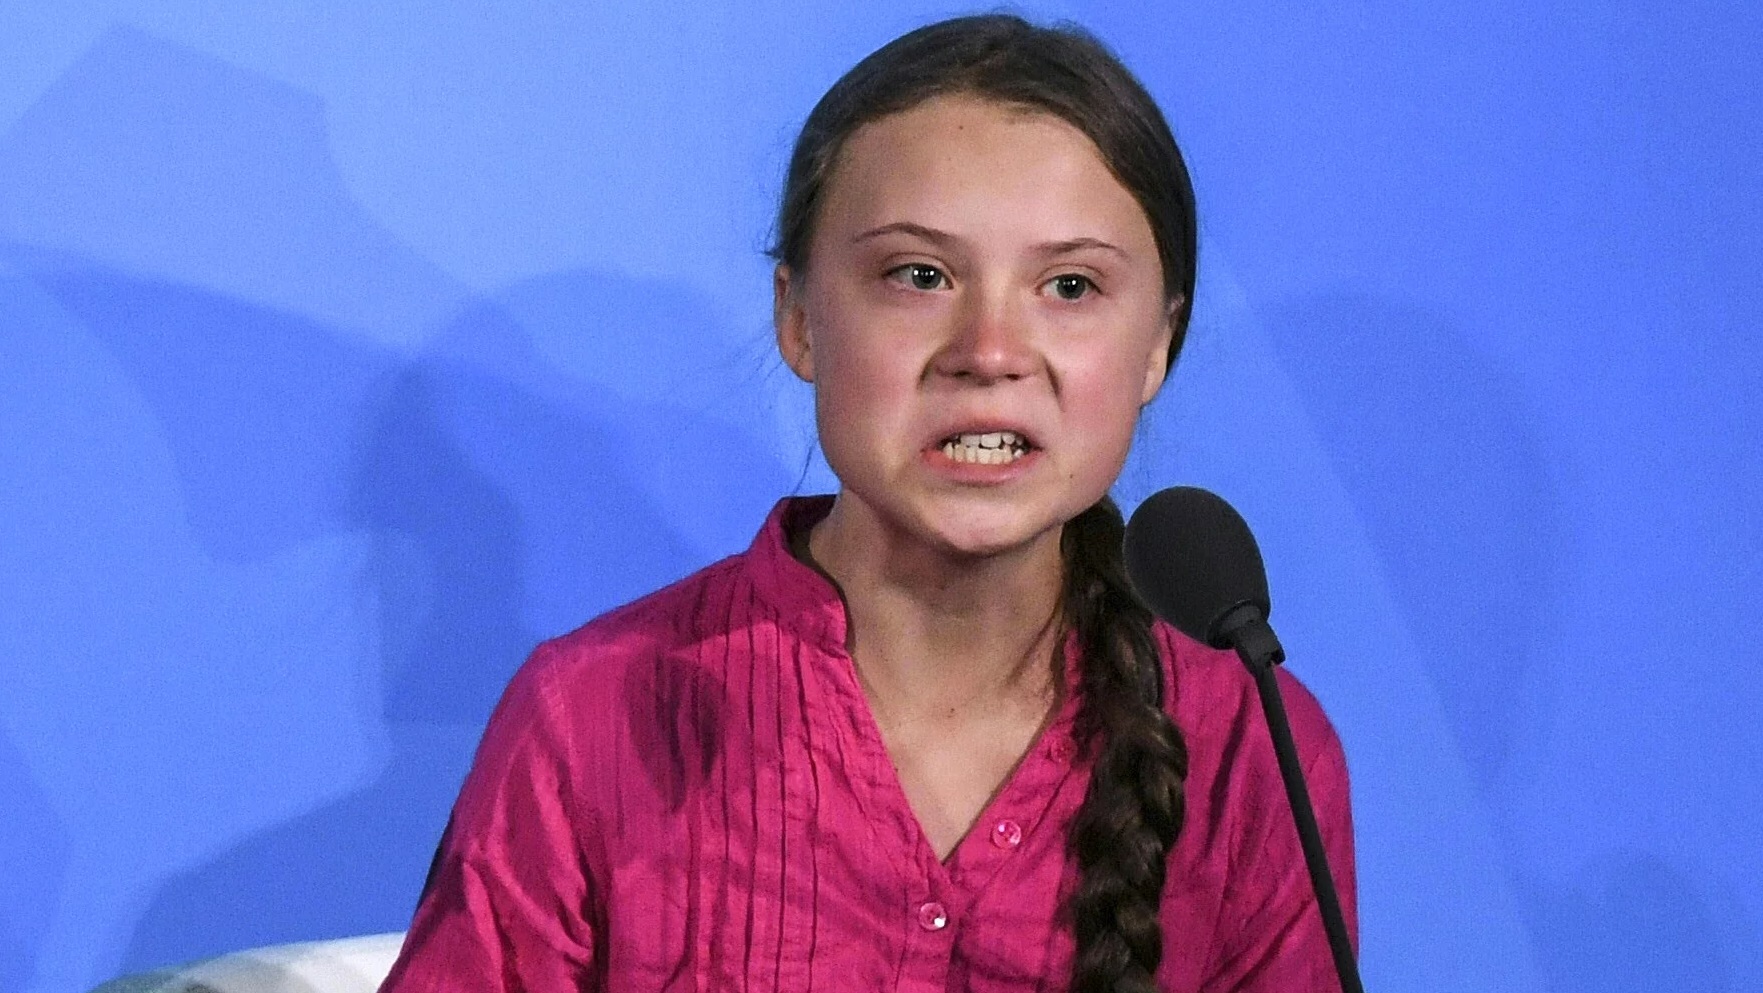 OBEY! Eco-alarmist child Greta Thunberg demands all her opponents be silenced… and Big Tech is likely to comply, since obedience is now considered “tolerance”